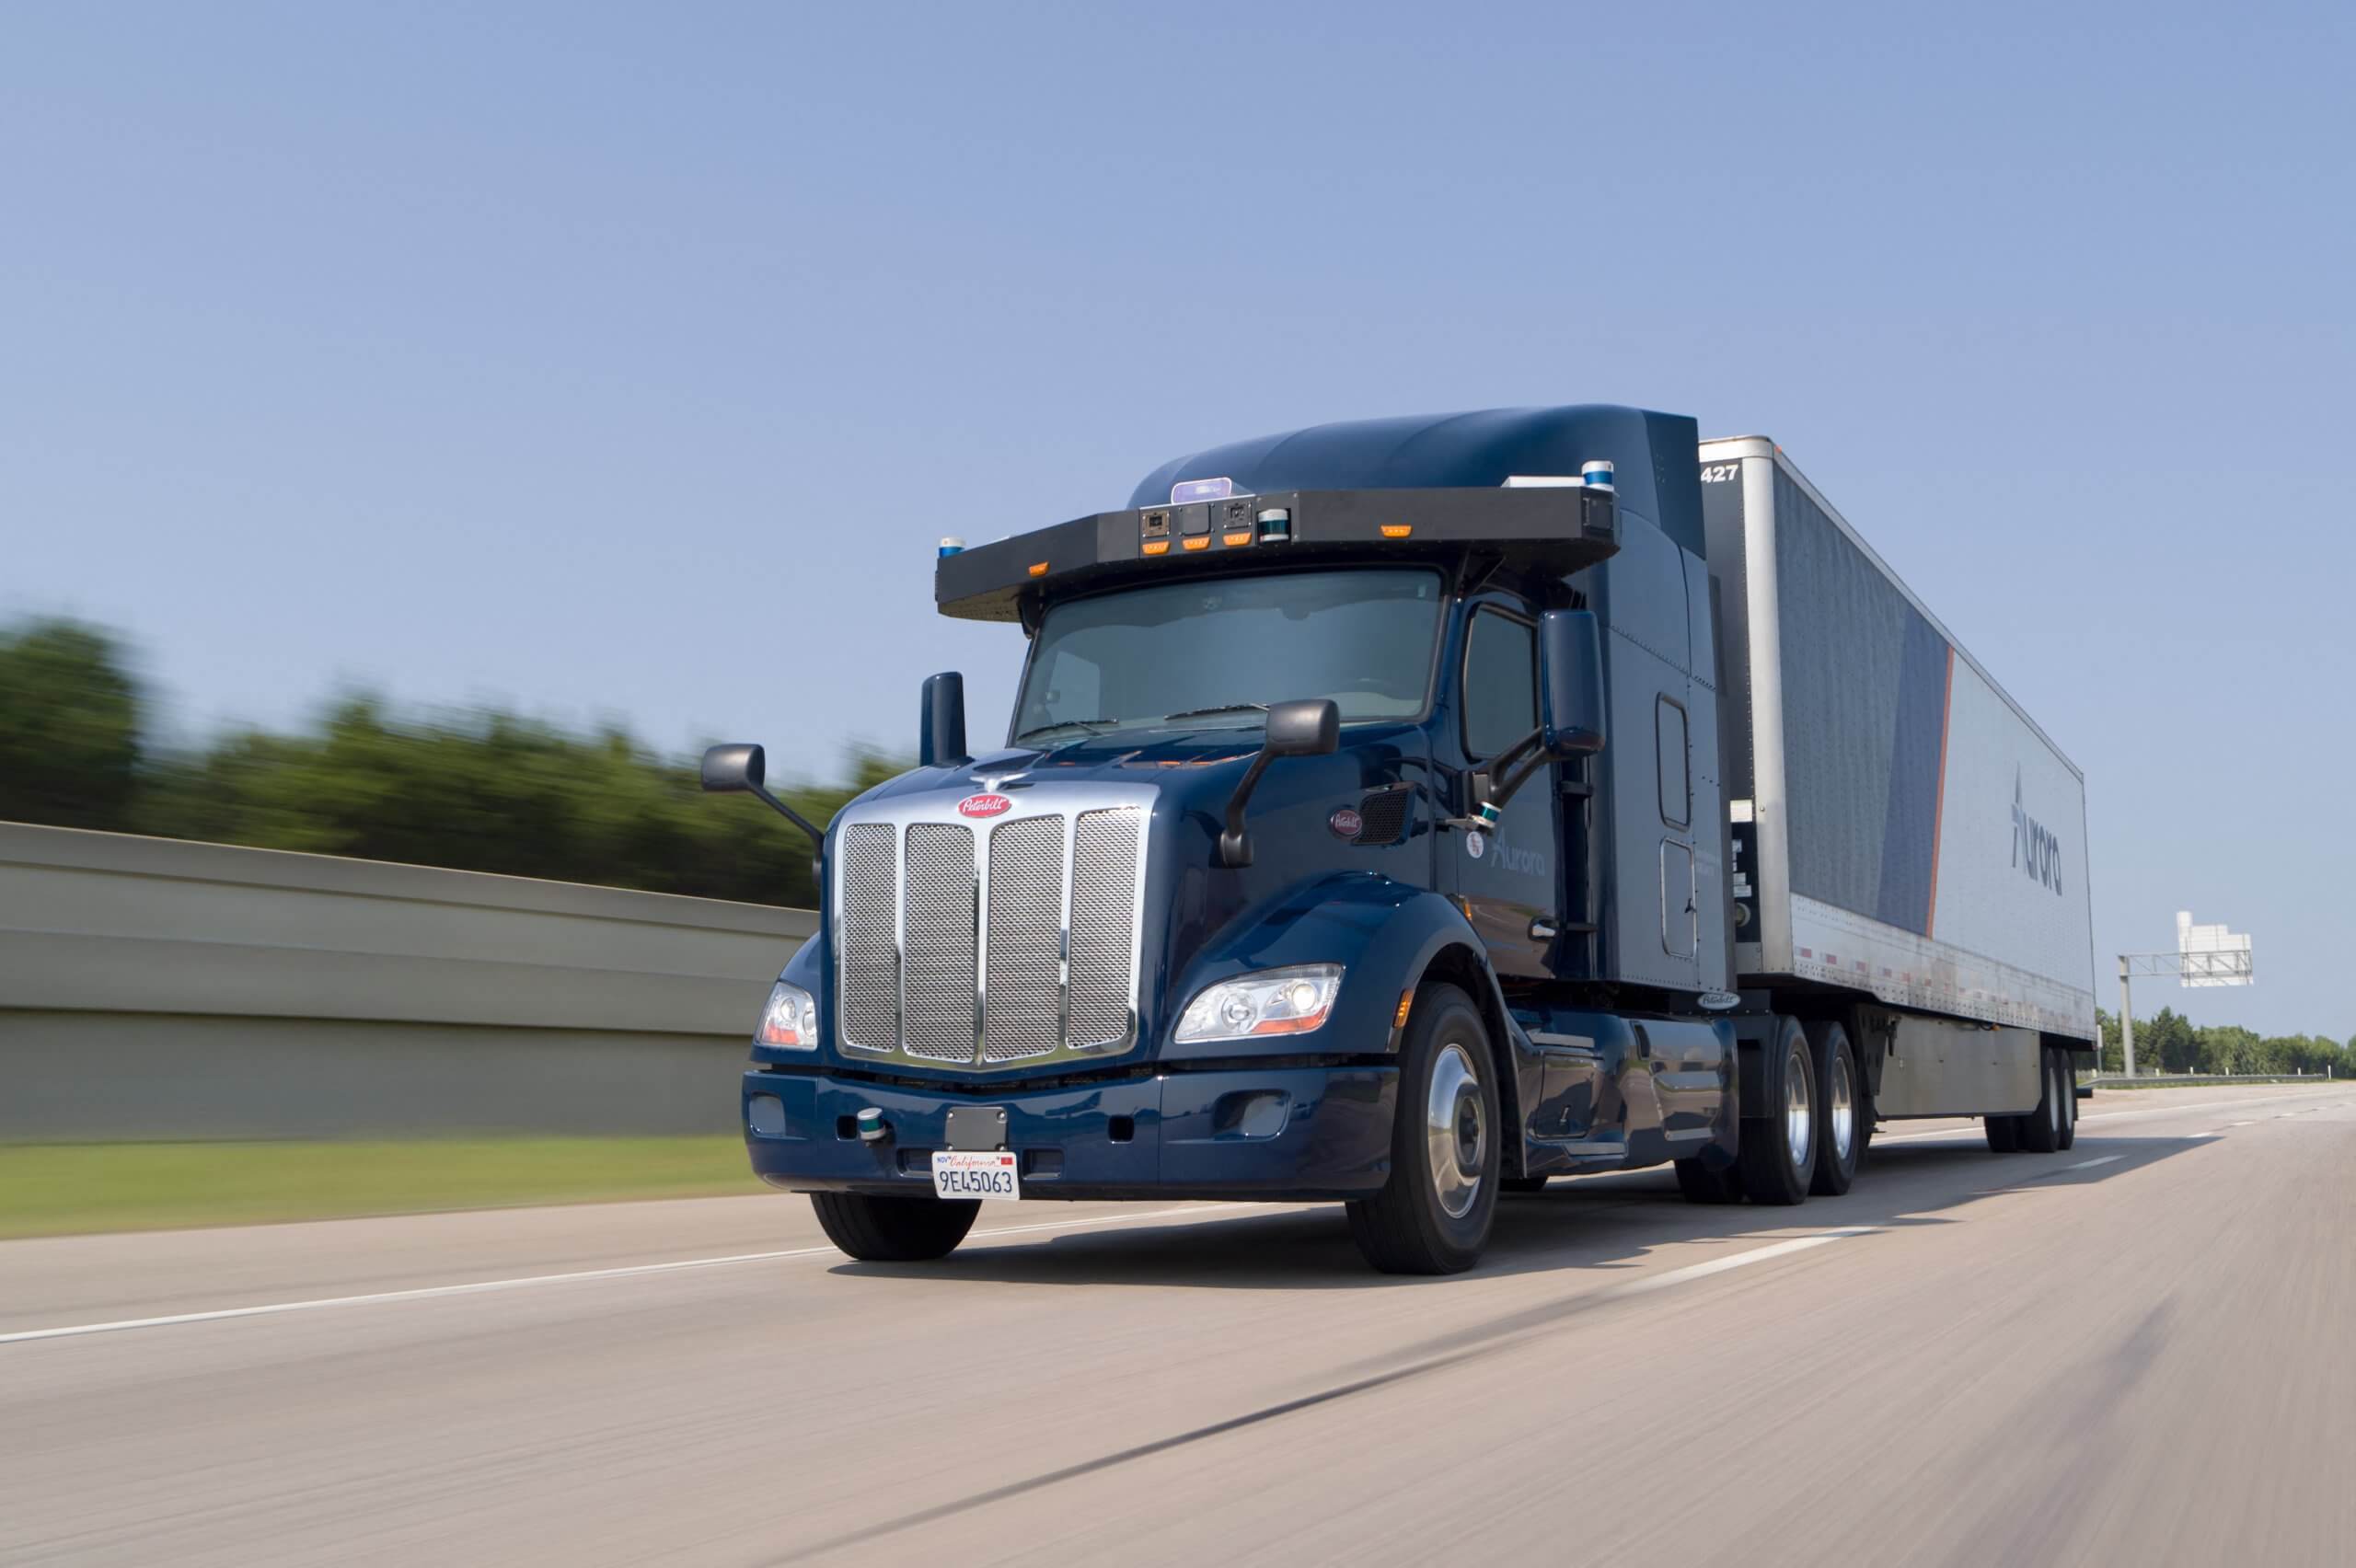 Robots trucks are on the road -- but not entirely. Are they safe enough now to replace the shortage of human drivers currently plaguing the trucking space?